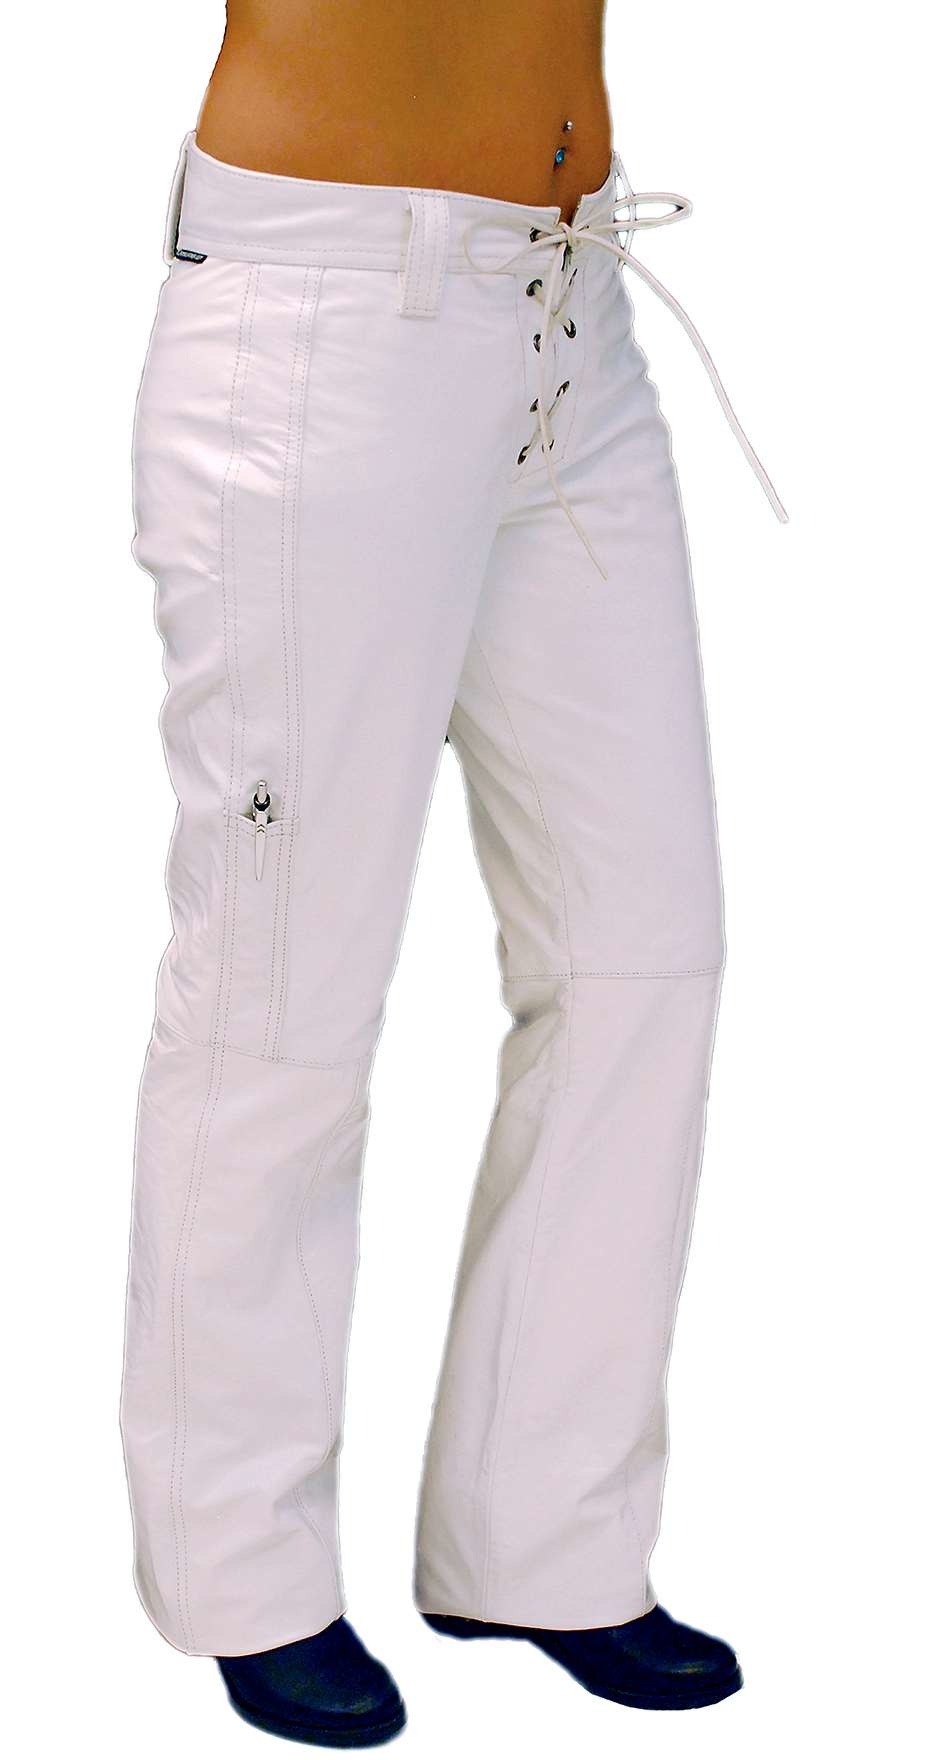 Lace Up White Leather Pants for Women #LP504LW - Jamin Leather®